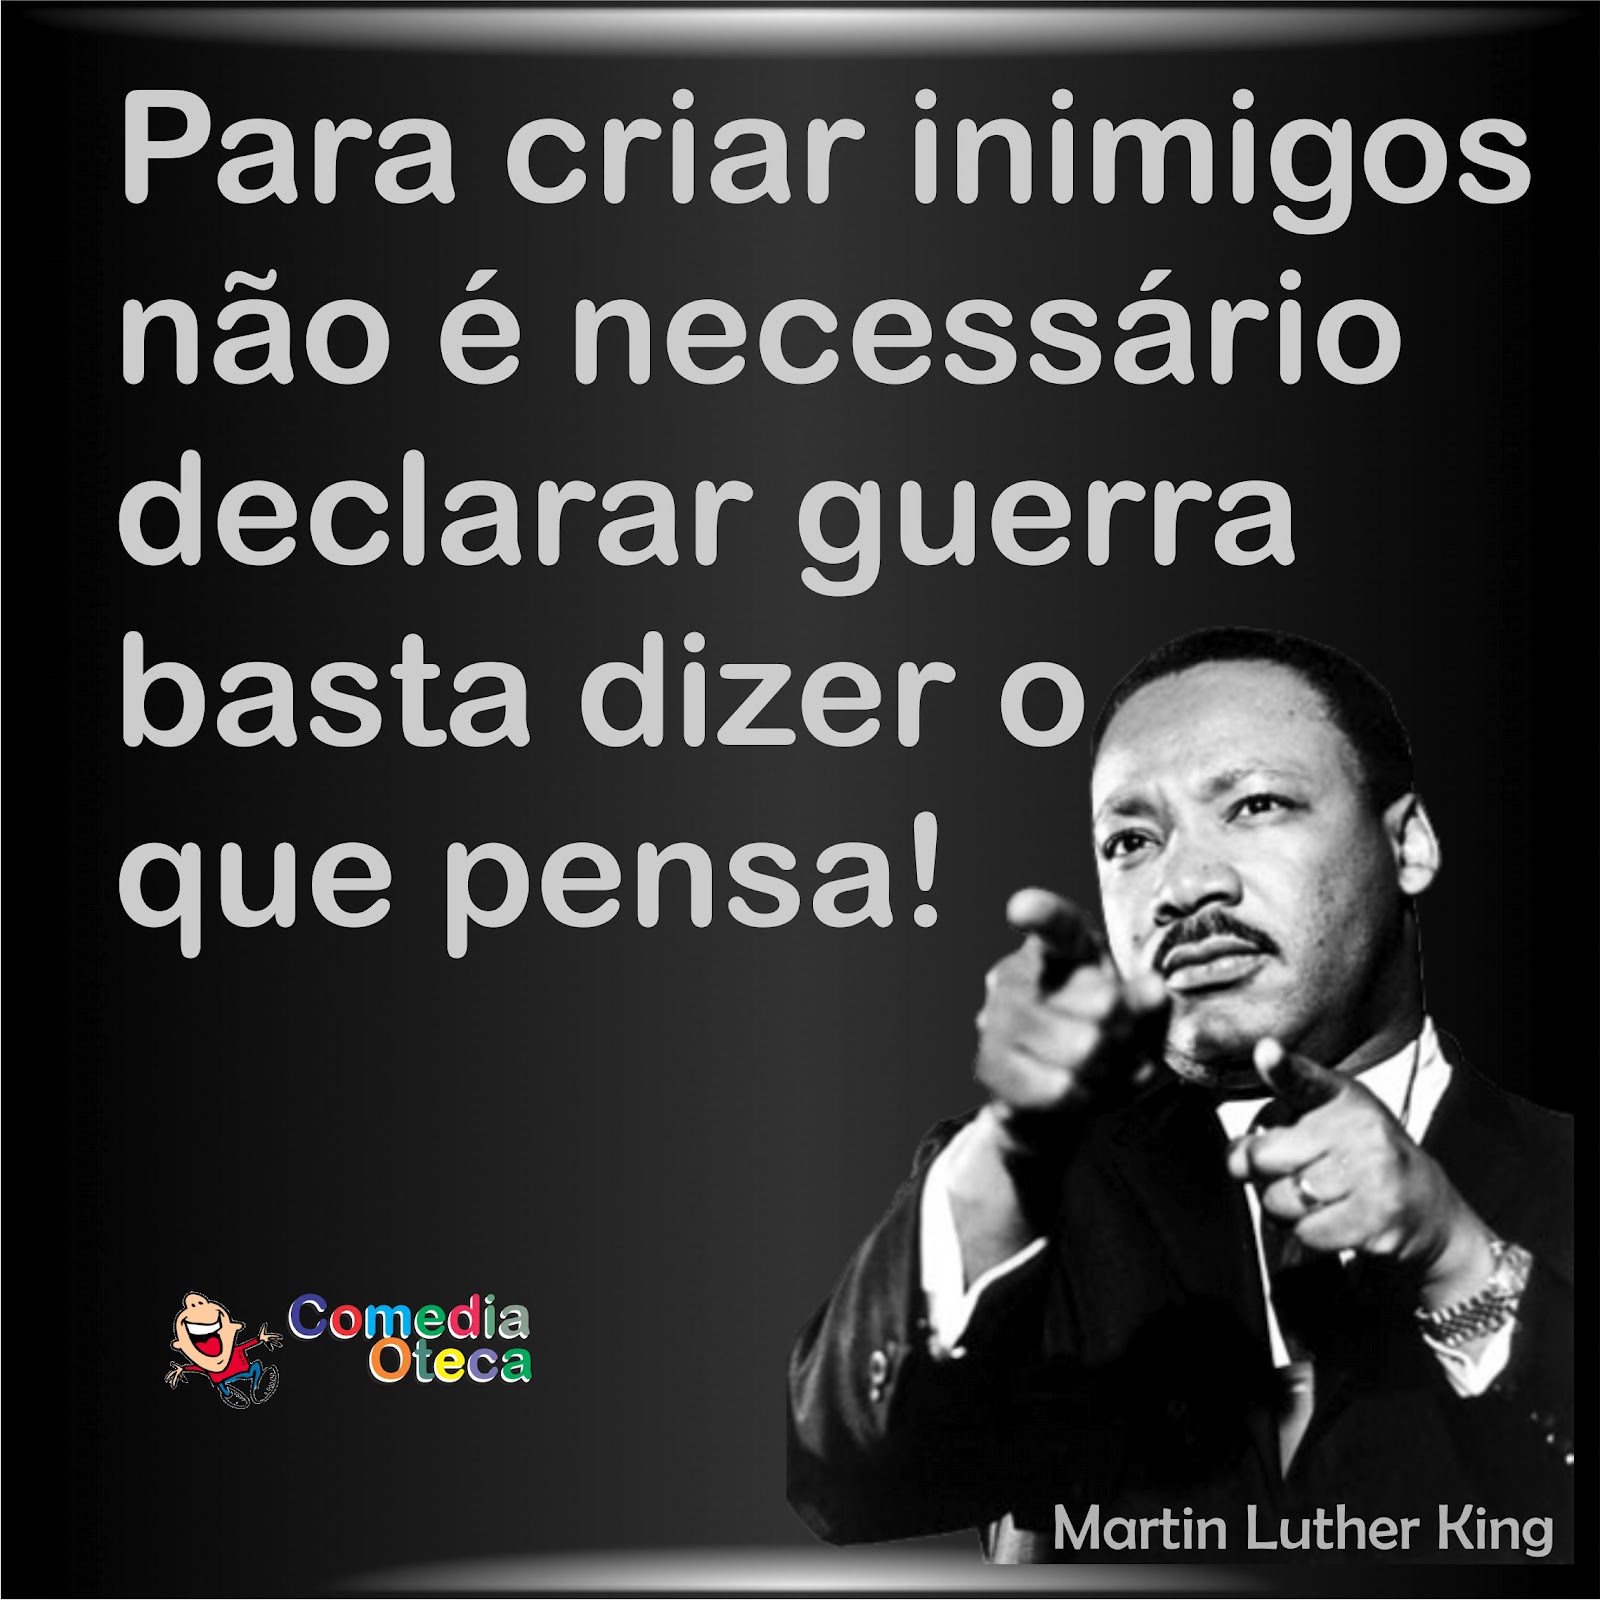 Martin Luther King Jr. Martin+luther+king